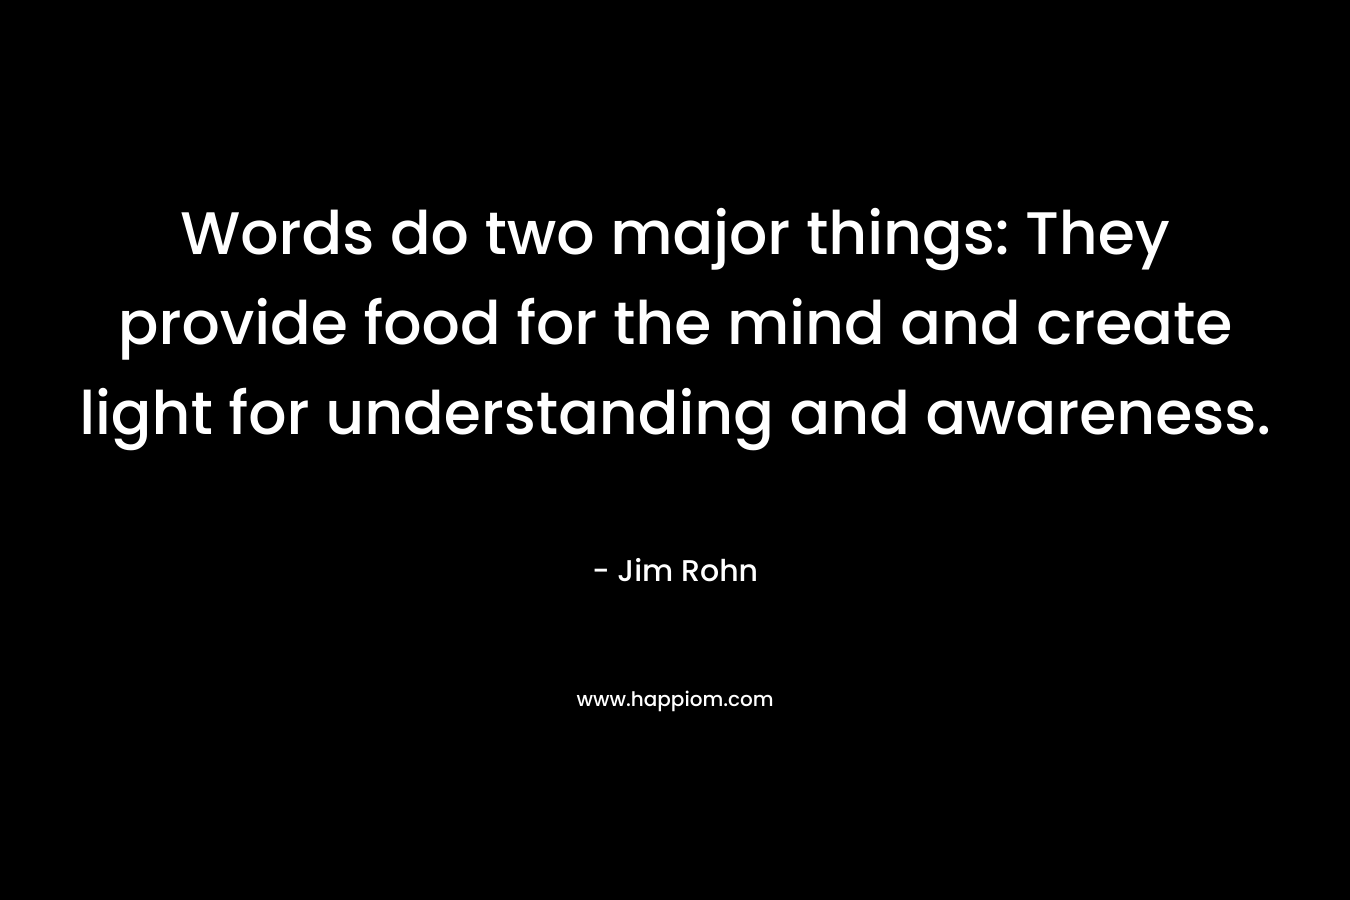 Words do two major things: They provide food for the mind and create light for understanding and awareness. – Jim Rohn